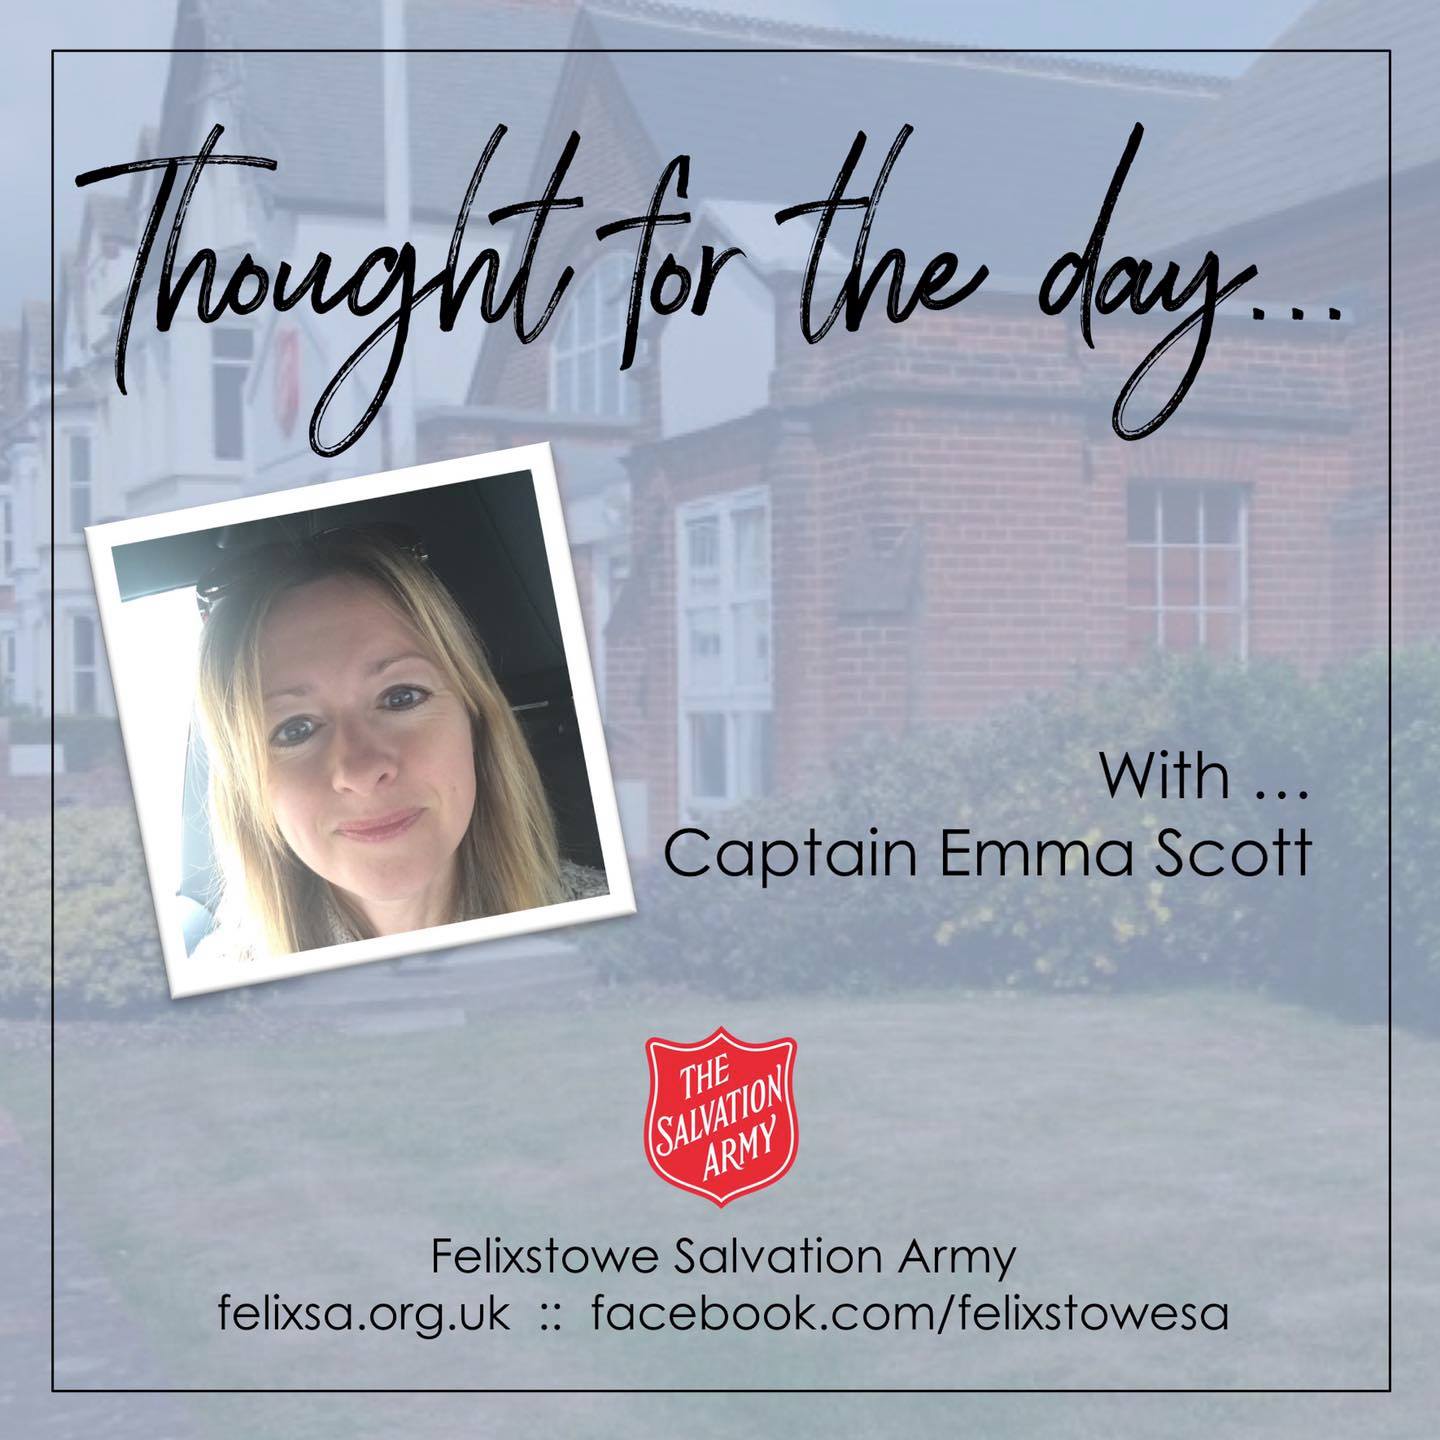 Thought for the Day with Captain Emma Scott